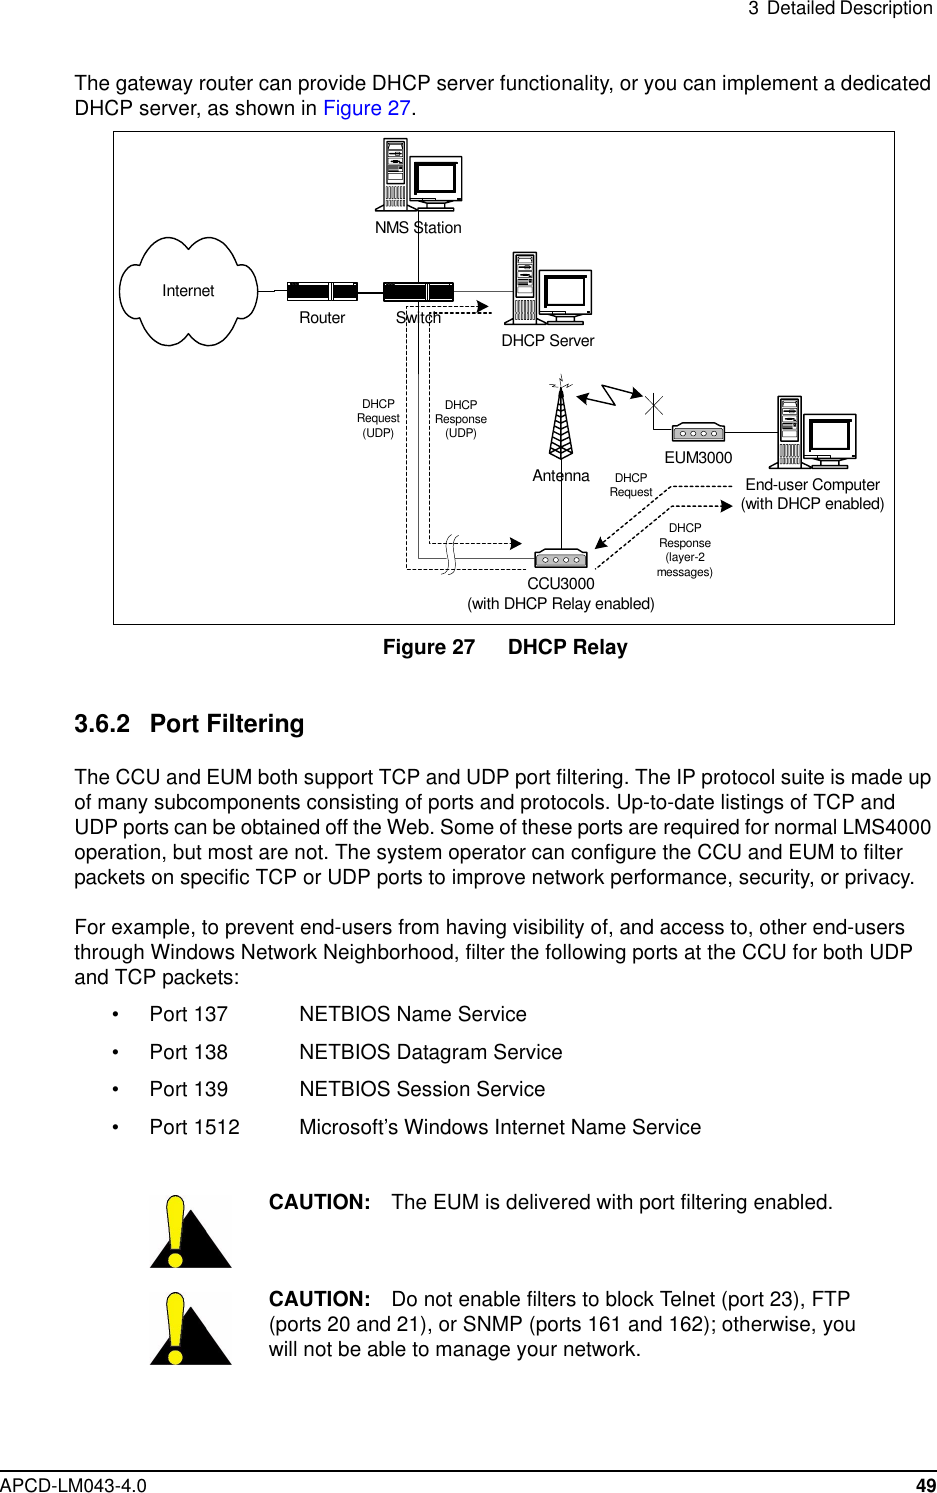 3 Detailed DescriptionAPCD-LM043-4.0 49The gateway router can provide DHCP server functionality, or you can implement a dedicatedDHCP server, as shown in Figure 27.Figure 27 DHCP Relay3.6.2 Port FilteringThe CCU and EUM both support TCP and UDP port filtering. The IP protocol suite is made upof many subcomponents consisting of ports and protocols. Up-to-date listings of TCP andUDP ports can be obtained off the Web. Some of these ports are required for normal LMS4000operation, but most are not. The system operator can configure the CCU and EUM to filterpackets on specific TCP or UDP ports to improve network performance, security, or privacy.For example, to prevent end-users from having visibility of, and access to, other end-usersthrough Windows Network Neighborhood, filter the following ports at the CCU for both UDPand TCP packets:• Port 137 NETBIOS Name Service• Port 138 NETBIOS Datagram Service• Port 139 NETBIOS Session Service• Port 1512 Microsoft’s Windows Internet Name ServiceCAUTION: The EUM is delivered with port filtering enabled.CAUTION: Do not enable filters to block Telnet (port 23), FTP(ports 20 and 21), or SNMP (ports 161 and 162); otherwise, youwill not be able to manage your network.CCU3000(with DHCP Relay enabled)Antenna EUM3000NMS StationSwitchInternetEnd-user Computer(with DHCP enabled)DHCP ServerDHCPRequestDHCPResponse(layer-2messages)DHCPRequest(UDP)DHCPResponse(UDP)Router